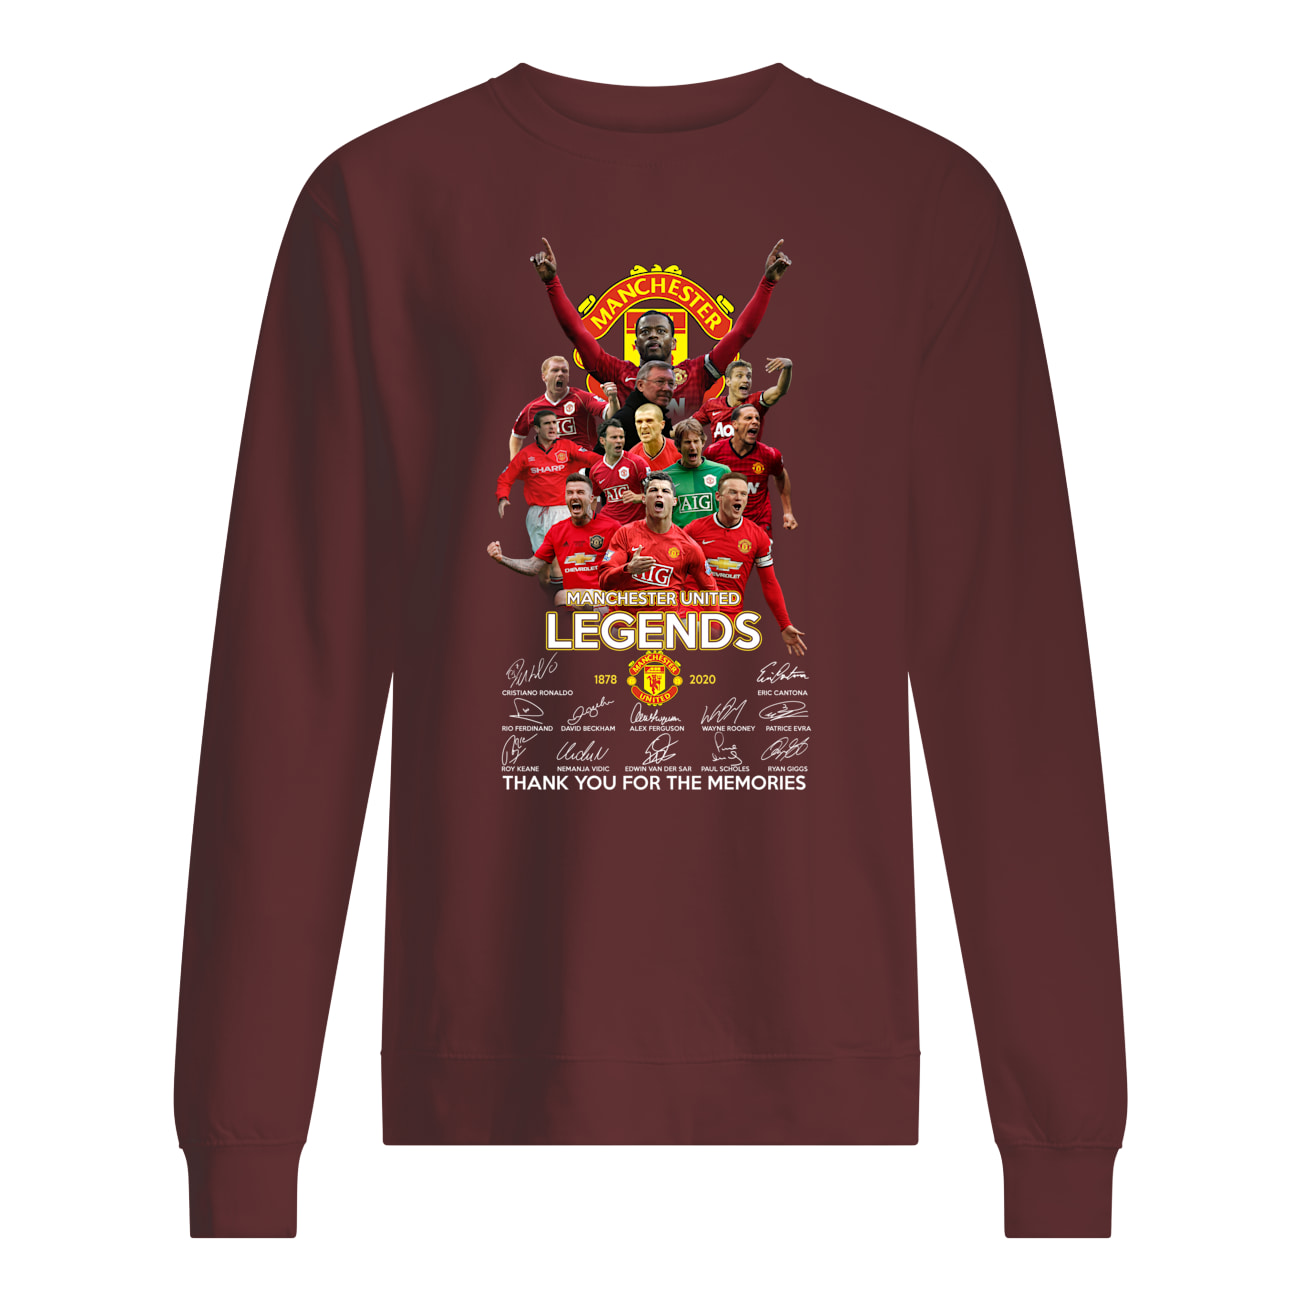 Manchester united legend 1878 2020 thank you for the memories signatures sweatshirt